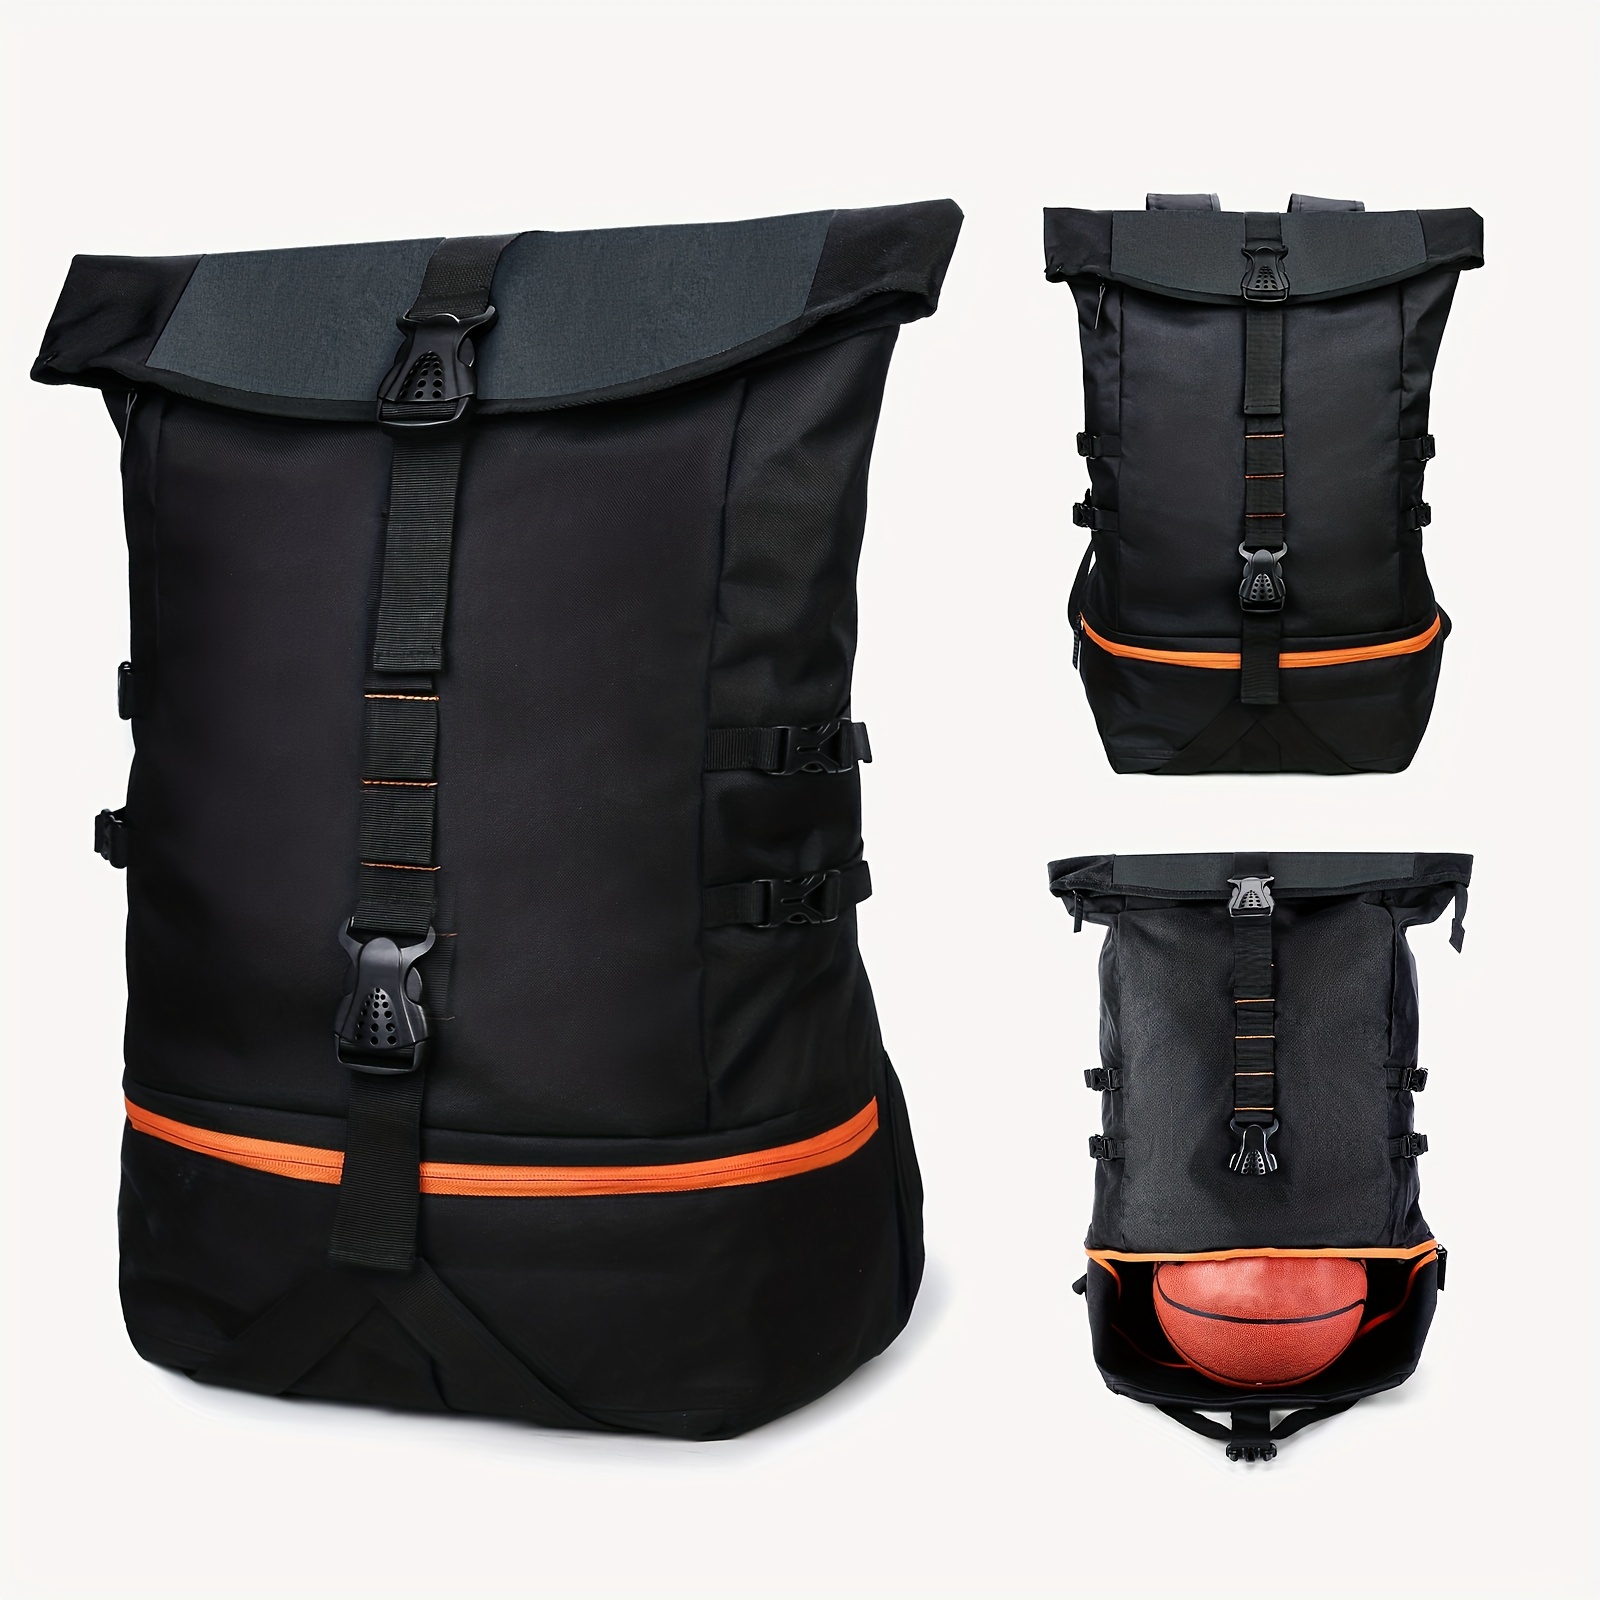 Basketball Backpack with Ball Compartment Sports Equipment Bag for